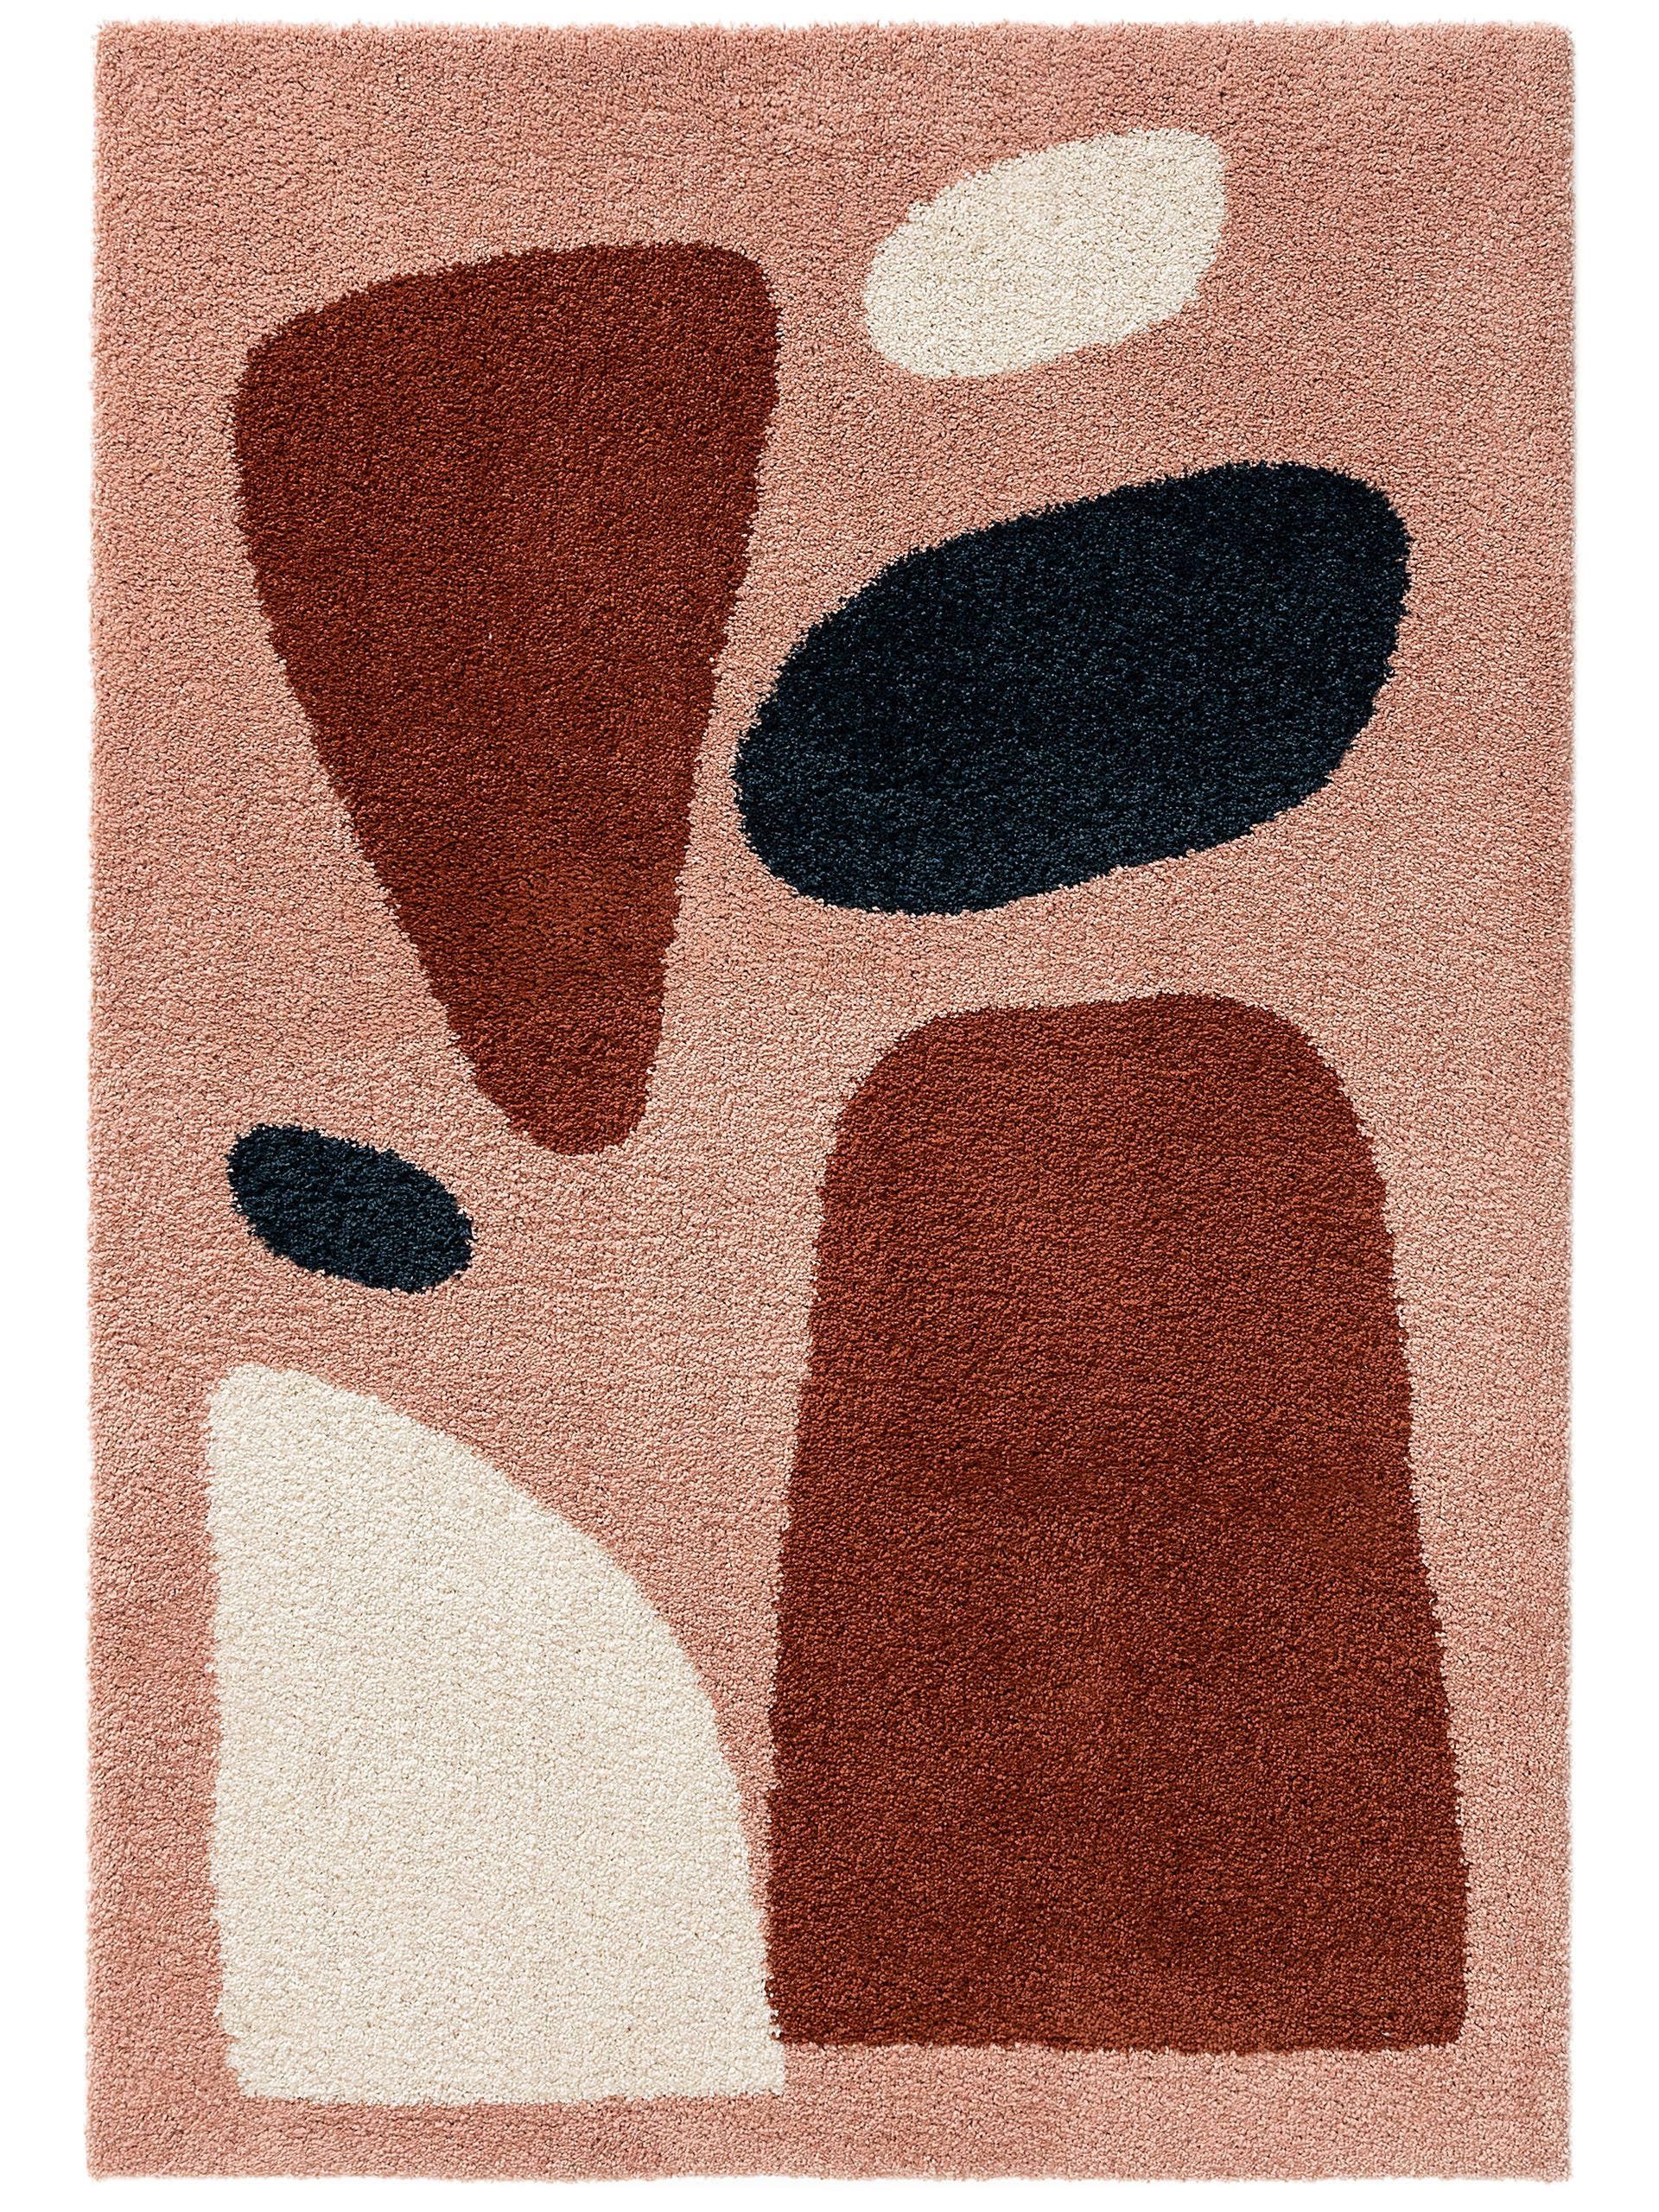 Luxurious Shaggy Rugs: Elevating Your
Space